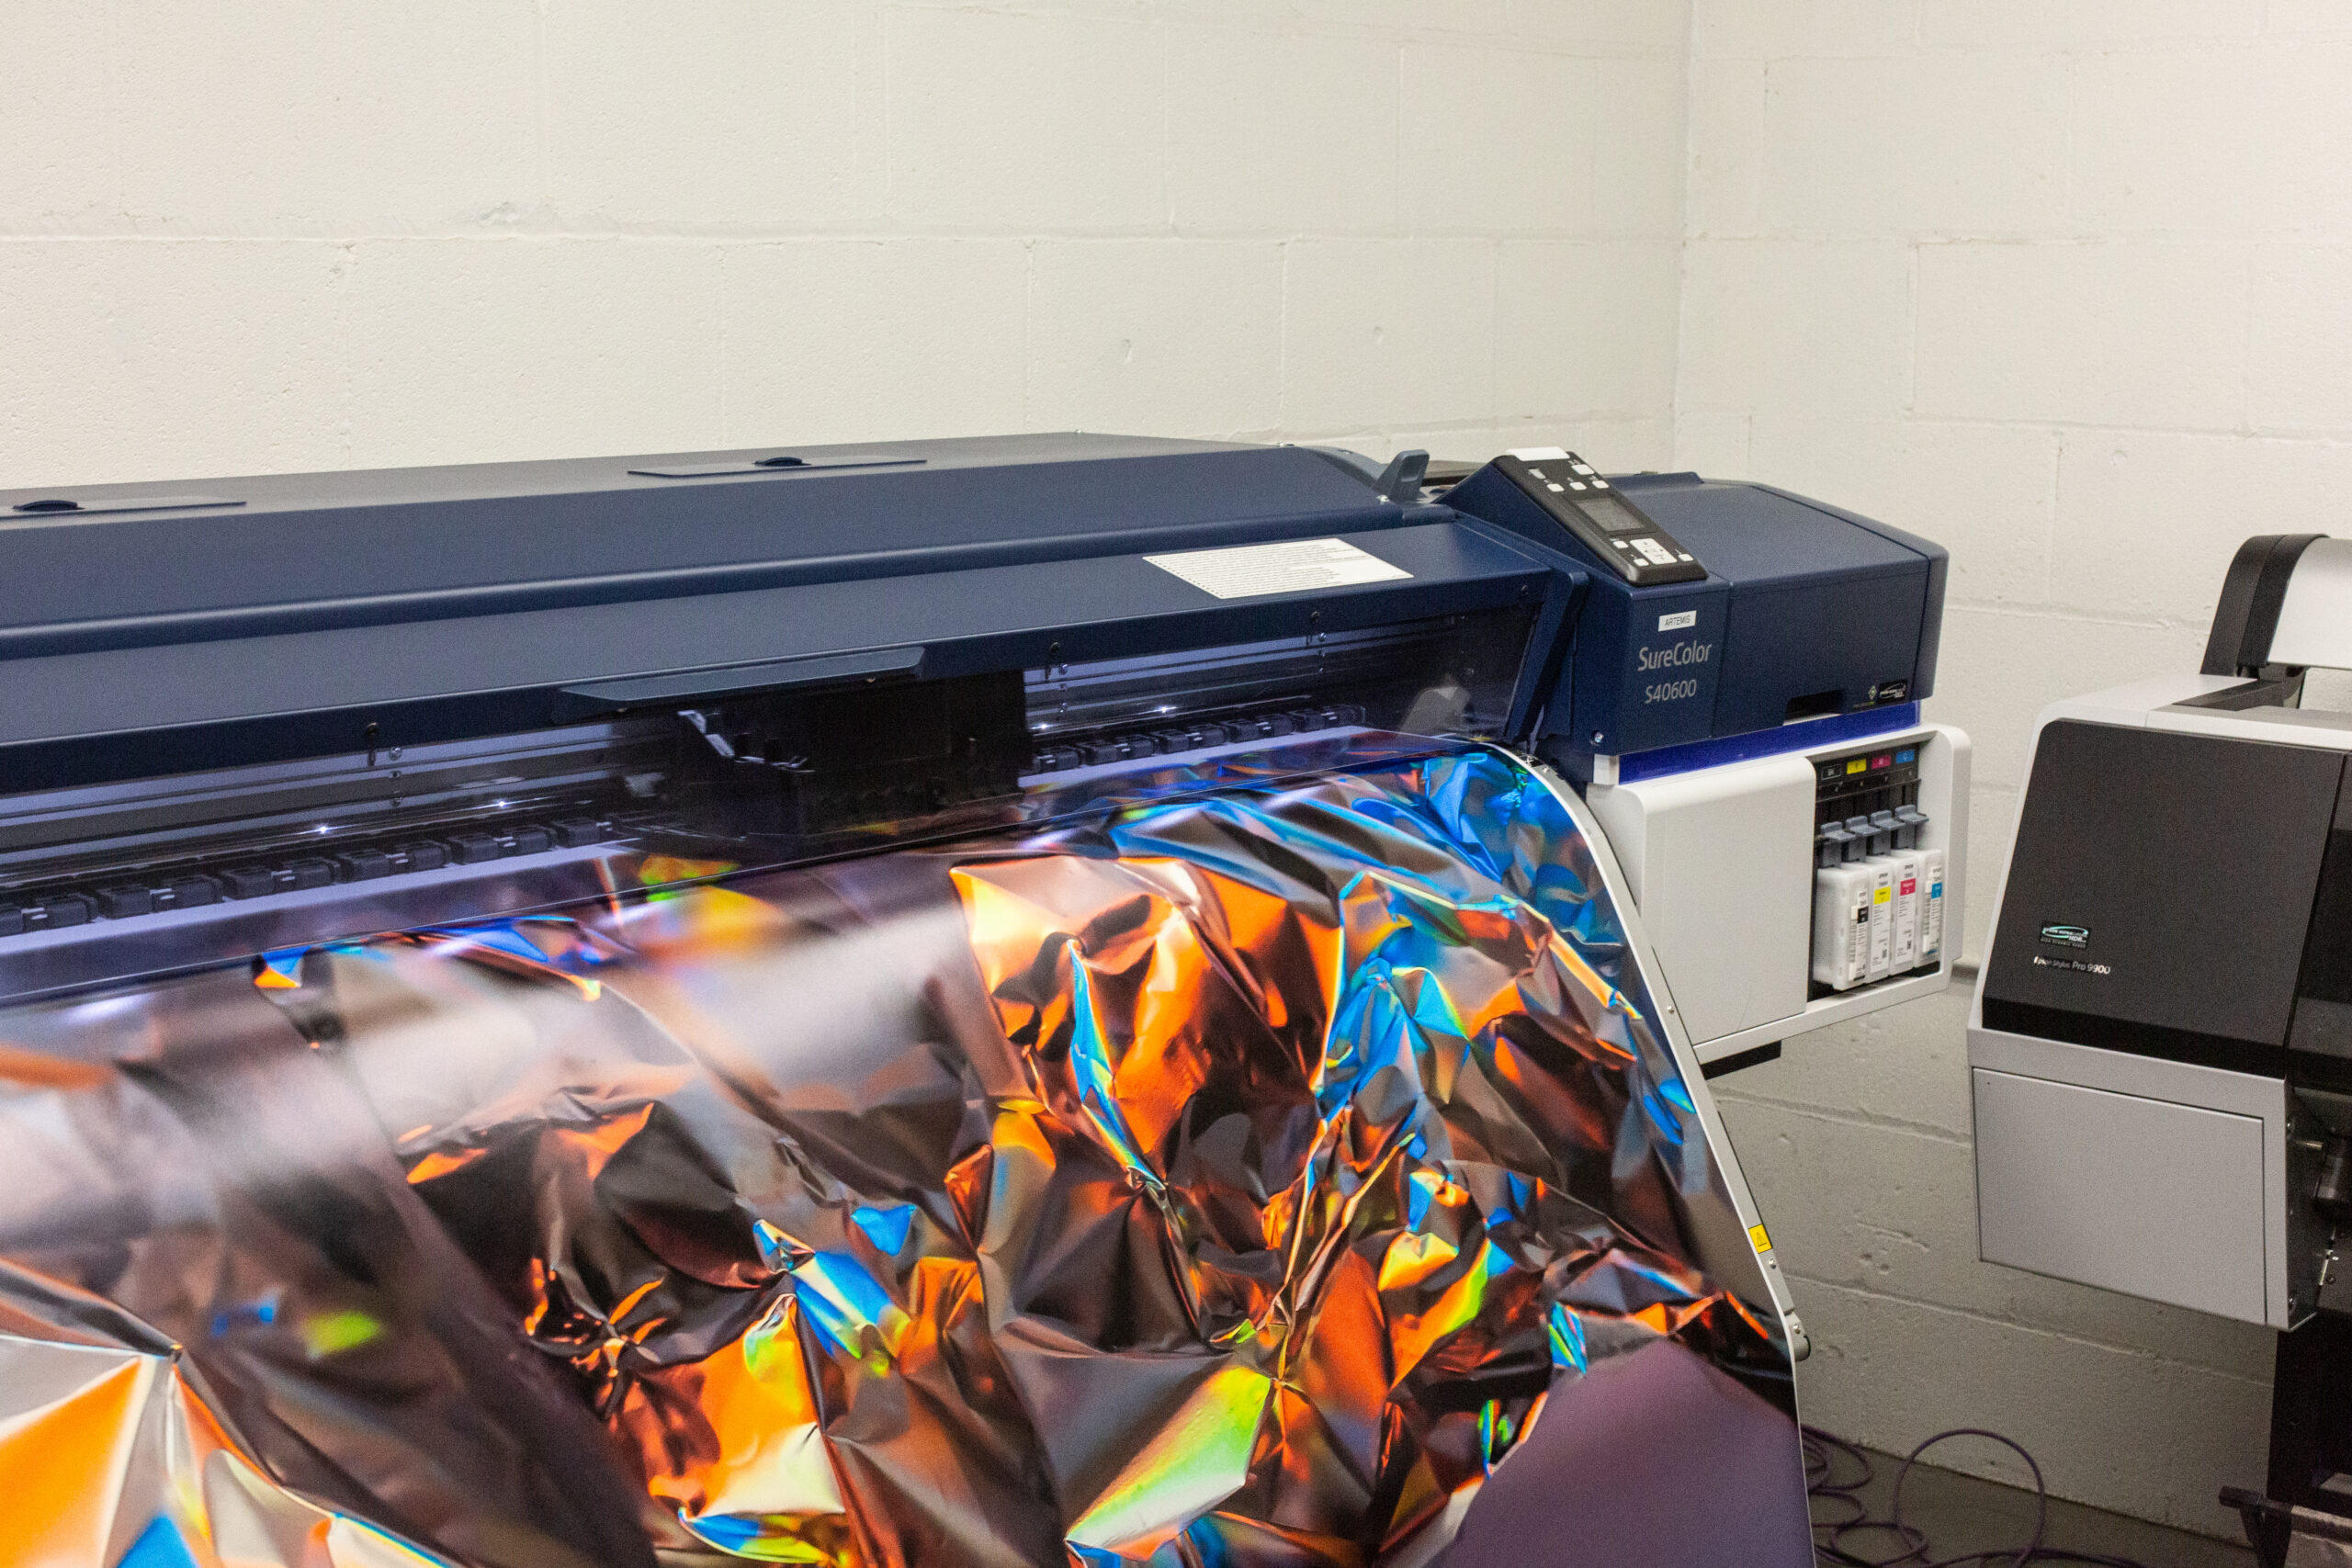 The Epson SureColor 40600 is in use for printing. It can print vivid imagery on a durable canvas substrate up to 58” on the shortest side.